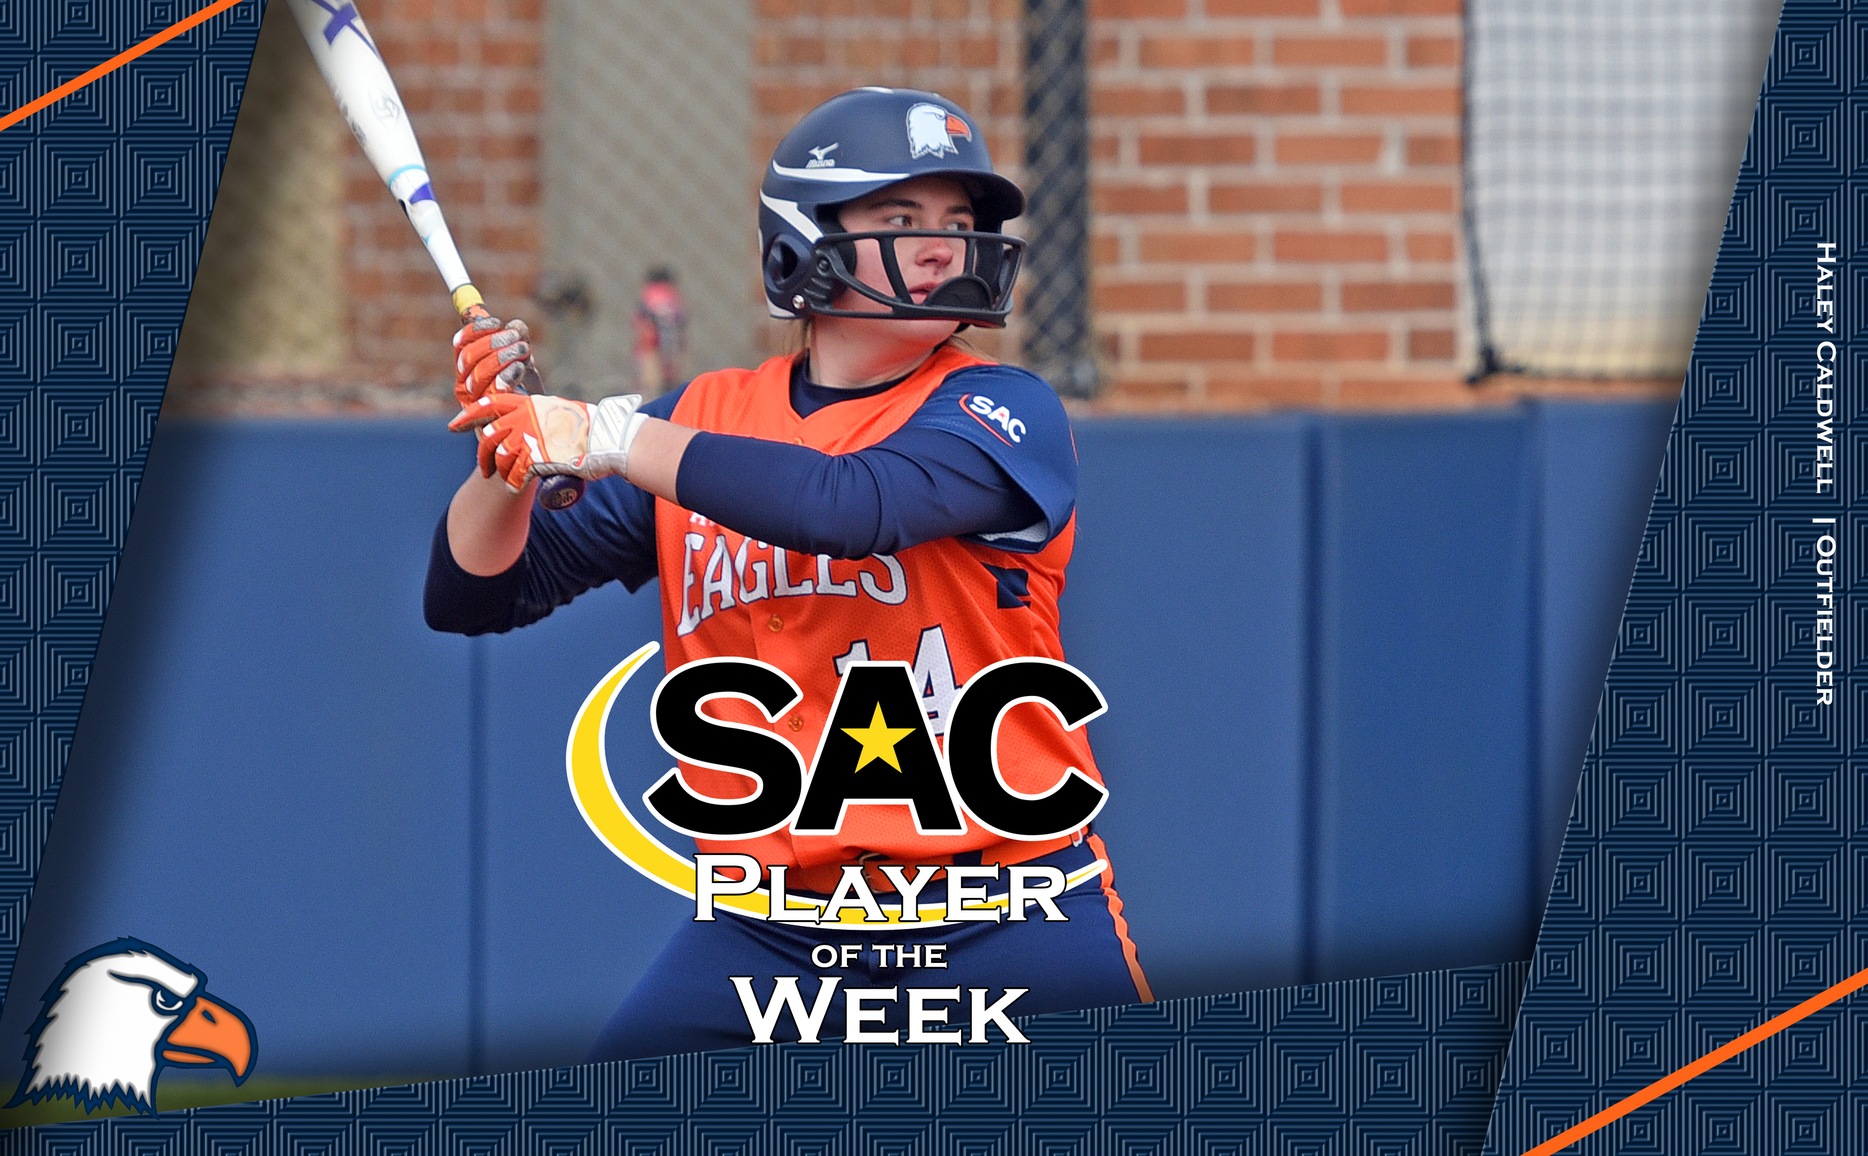 Caldwell nets AstroTurf SAC Player of the Week accolade